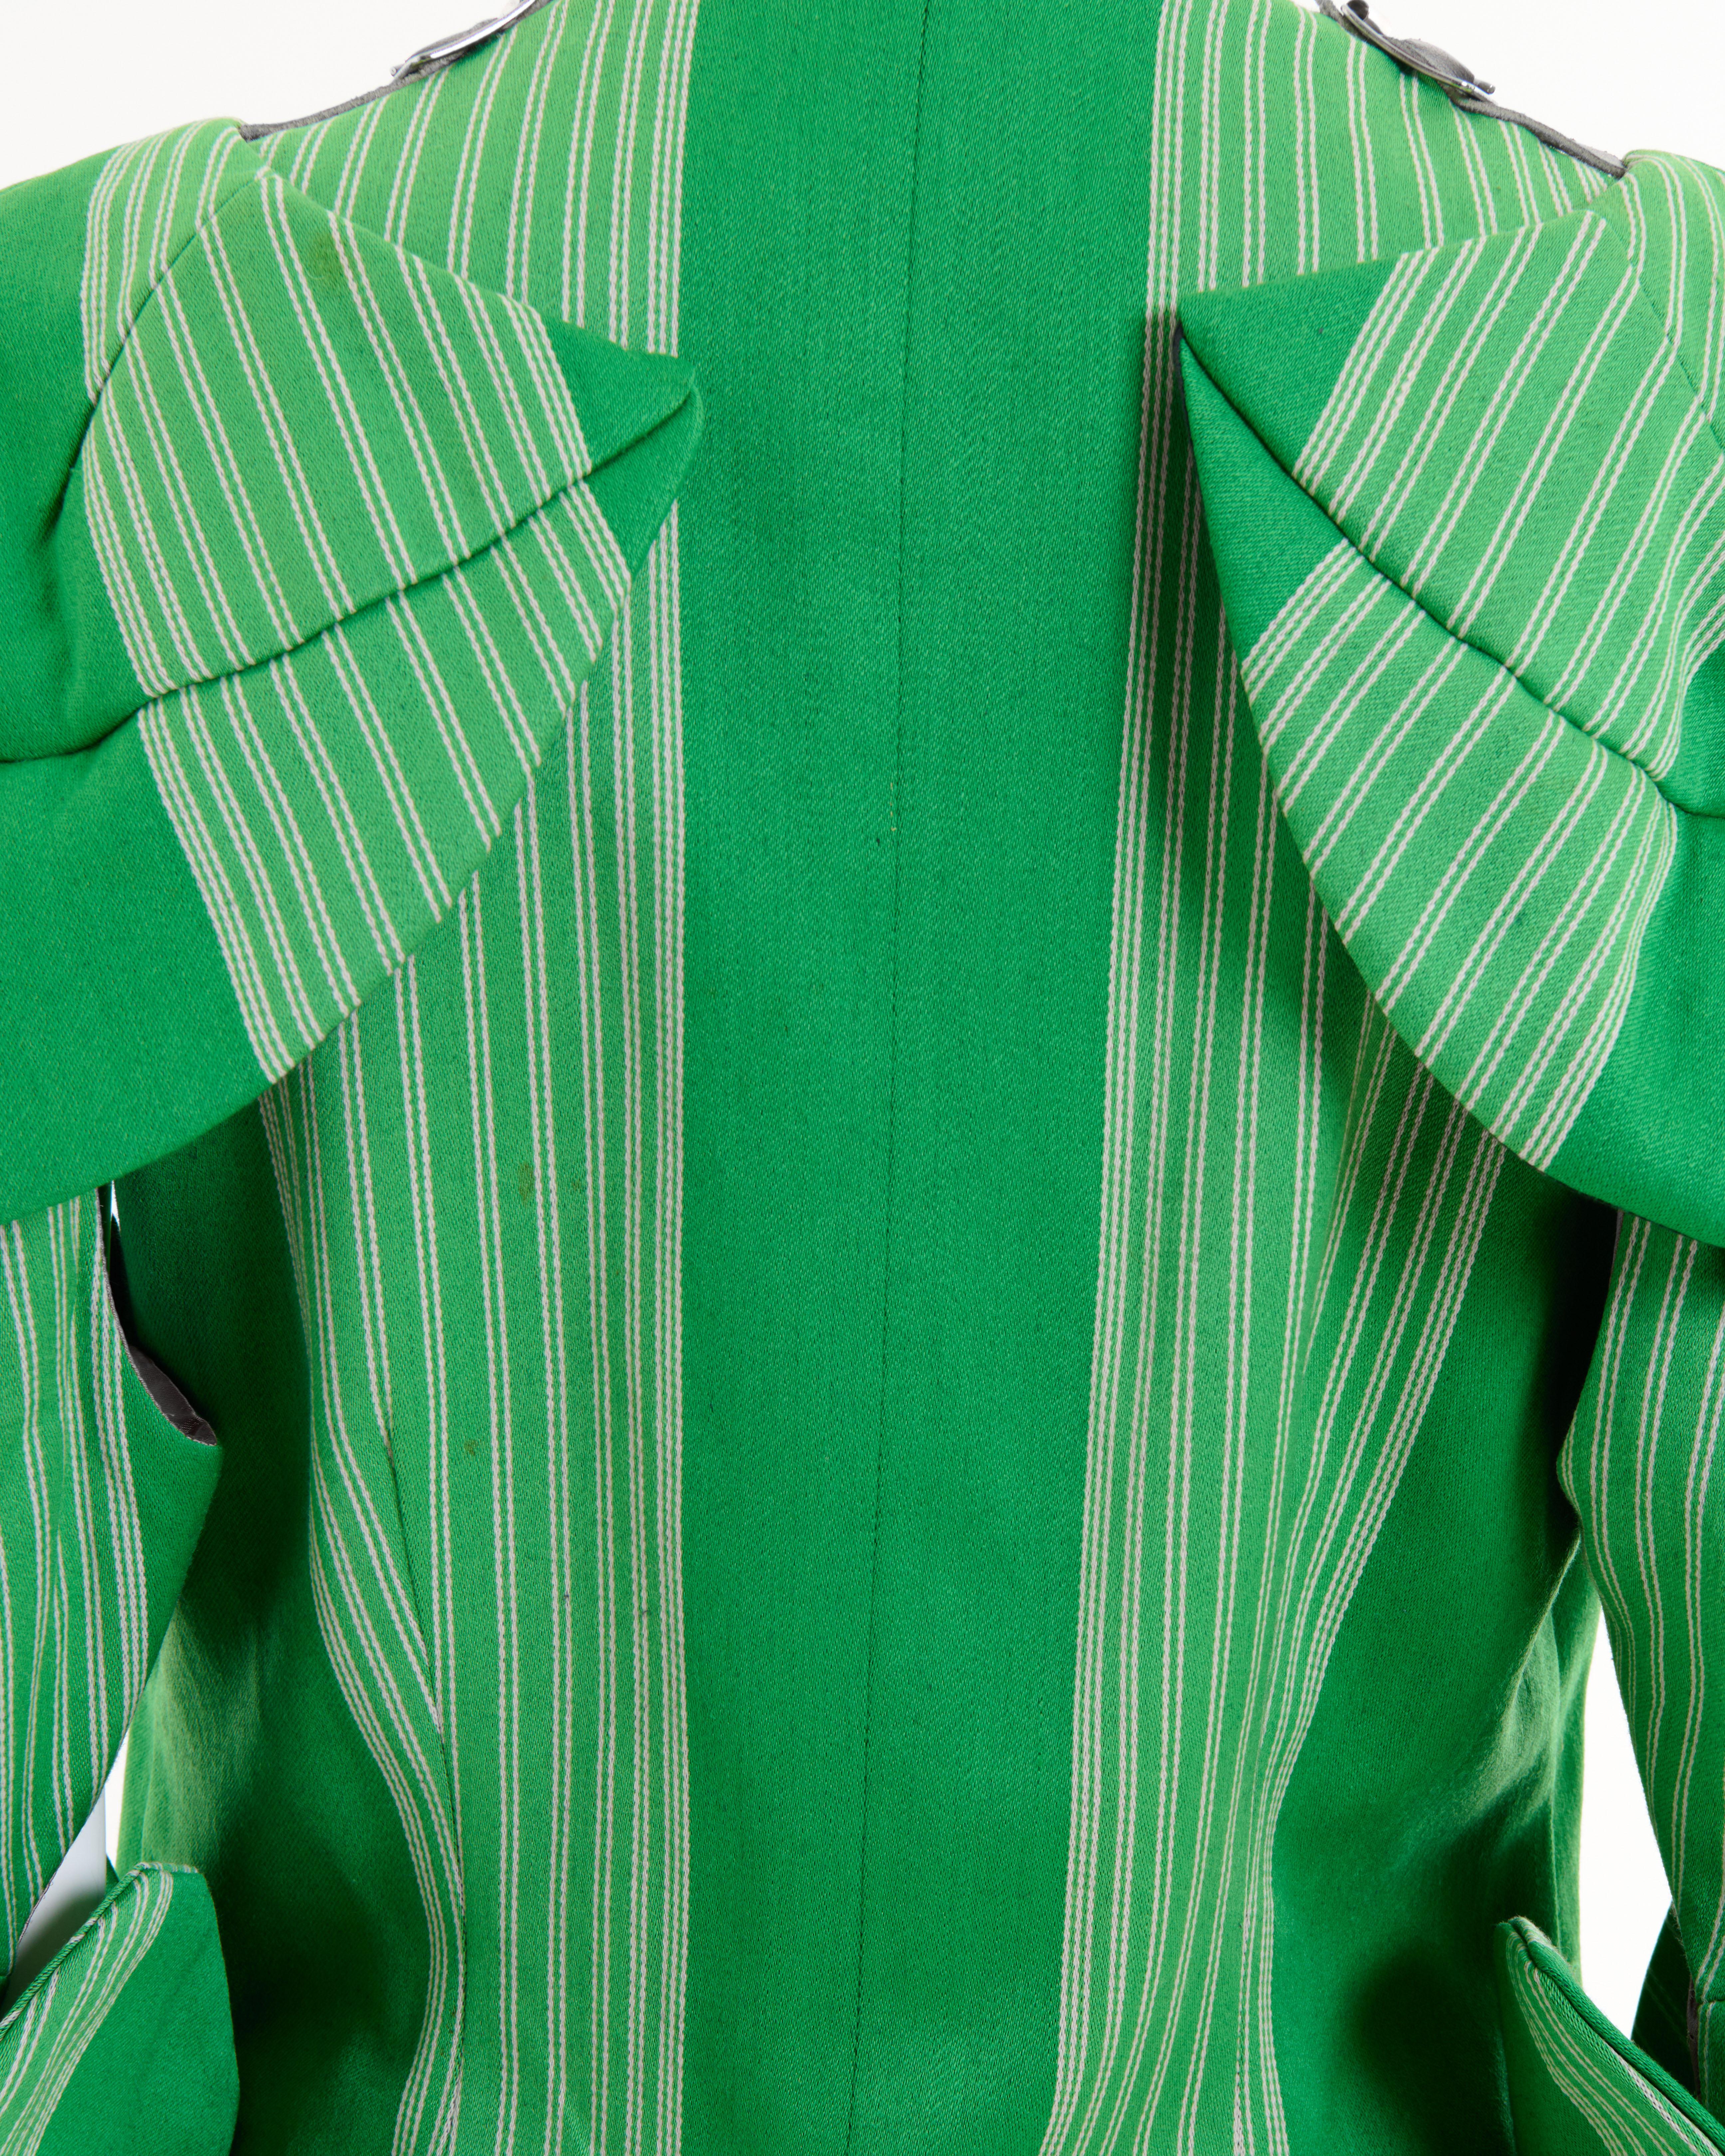 Vivienne Westwood  F/W 1988/89 ‘Time Machine’ Green striped Armour jacket For Sale 6